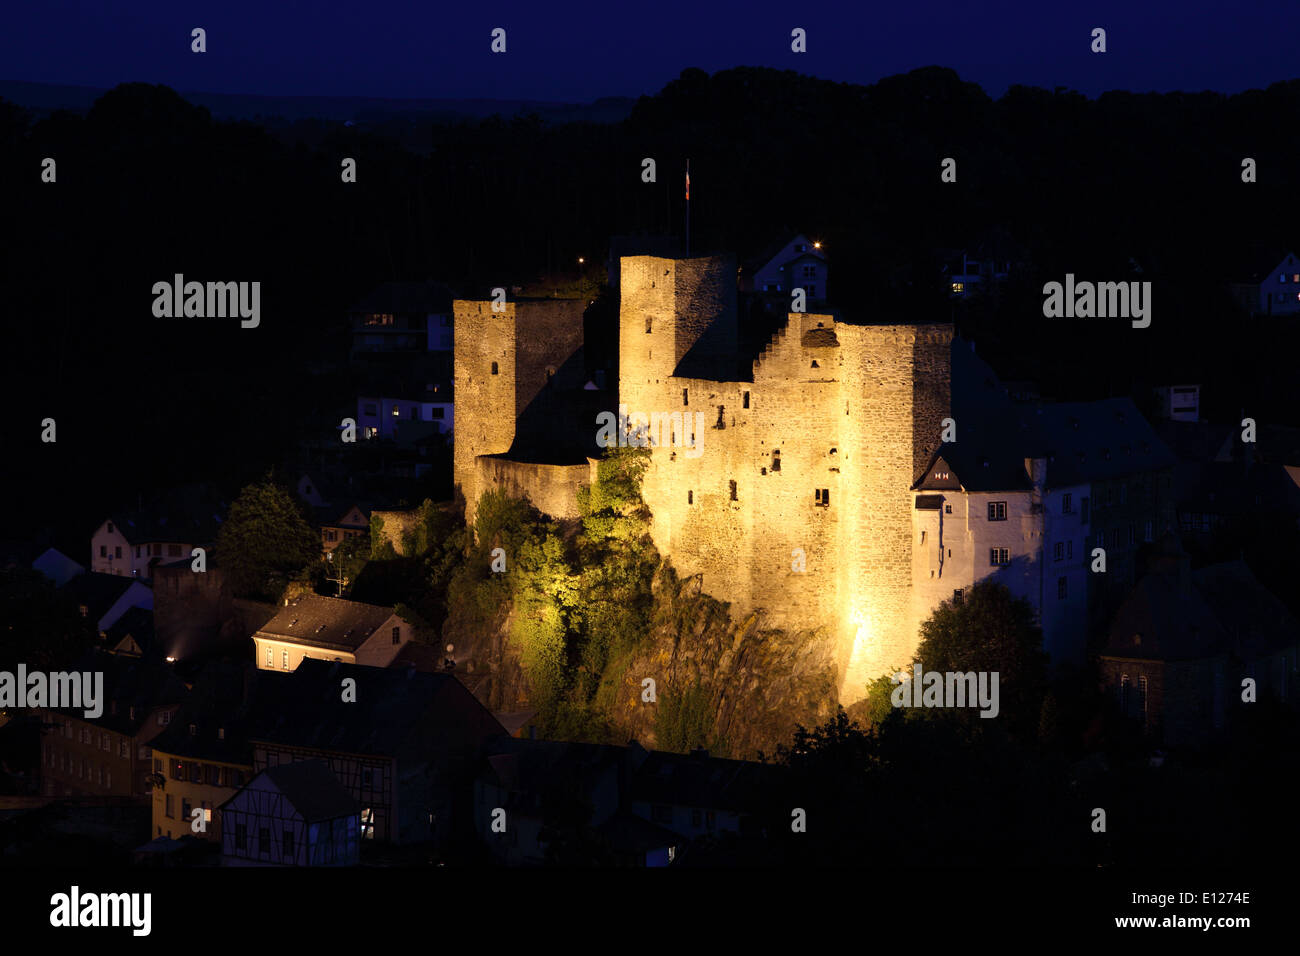 Medieval fortress in town Runkel illuminated at night. Hesse, Germany Stock Photo